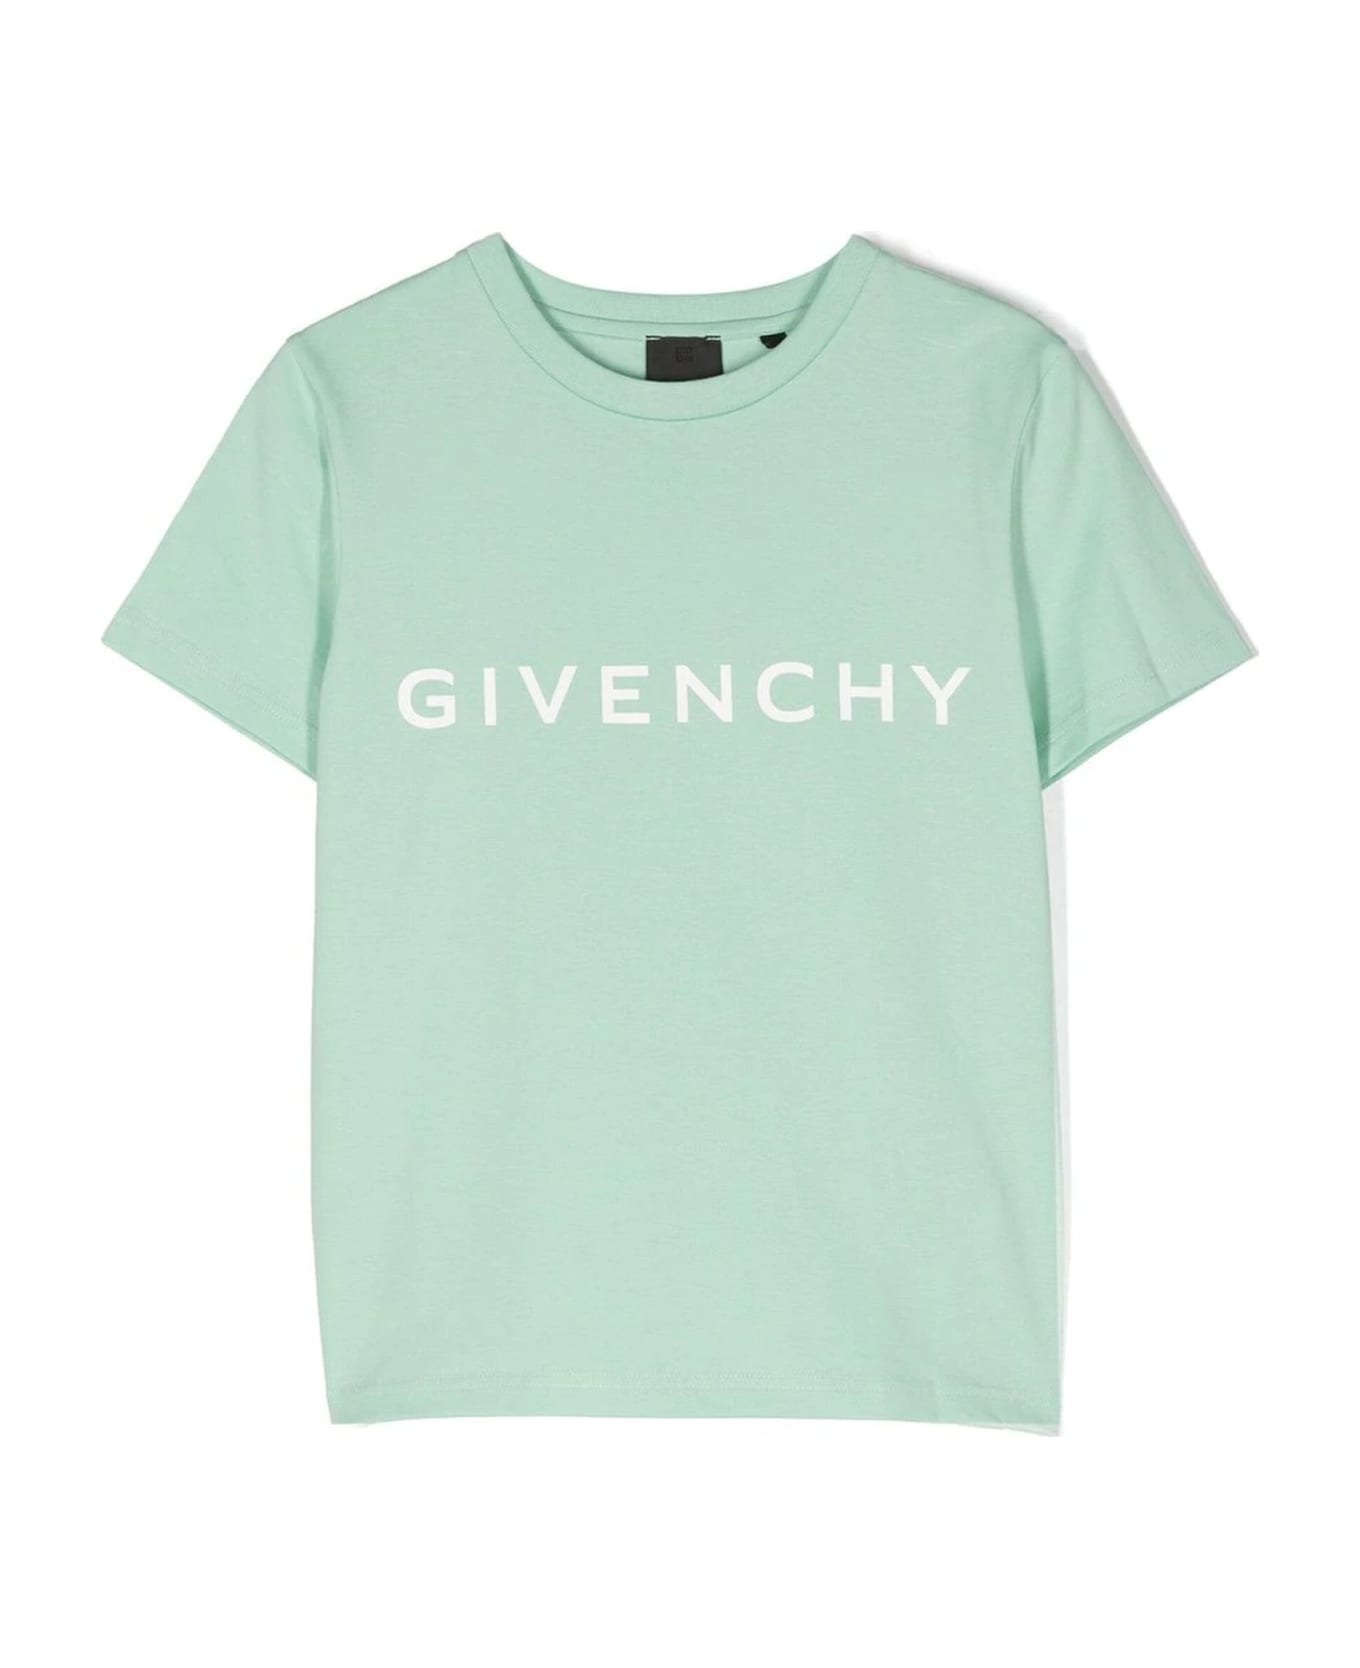 Givenchy Green Cotton Tshirt - Verde